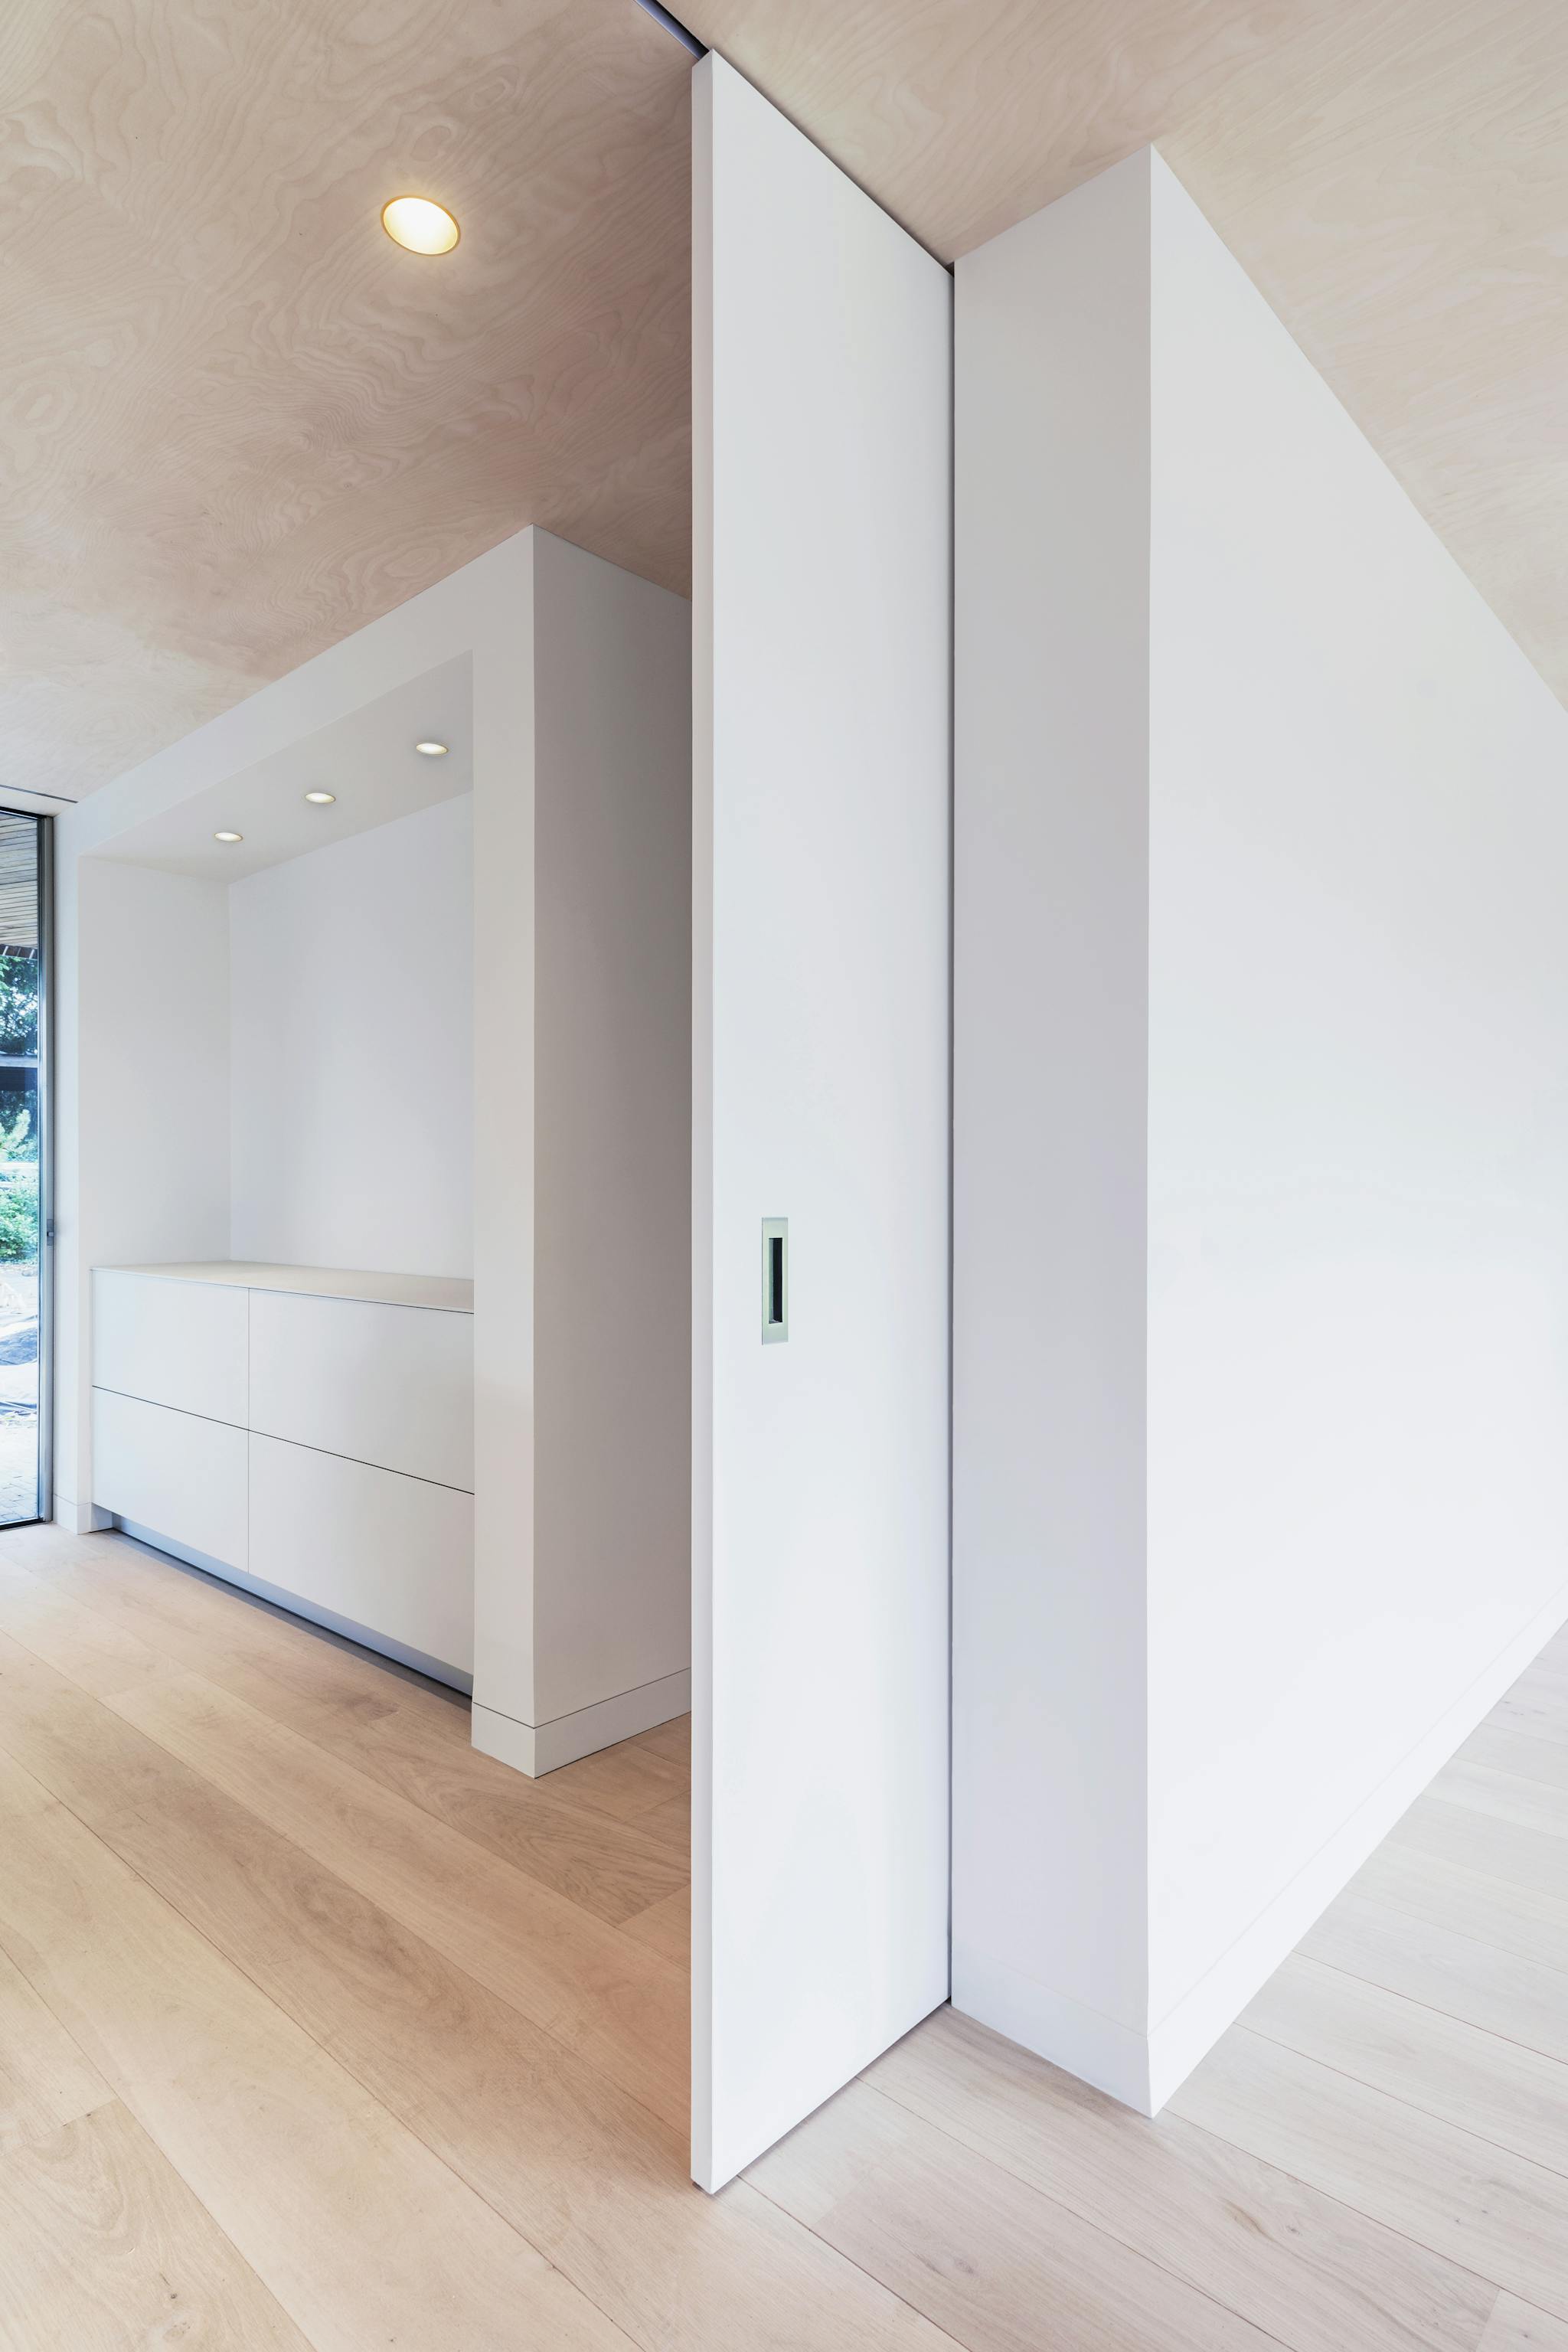 A minimalist interior with light wood flooring and a large white sliding pocket door with a recessed pull